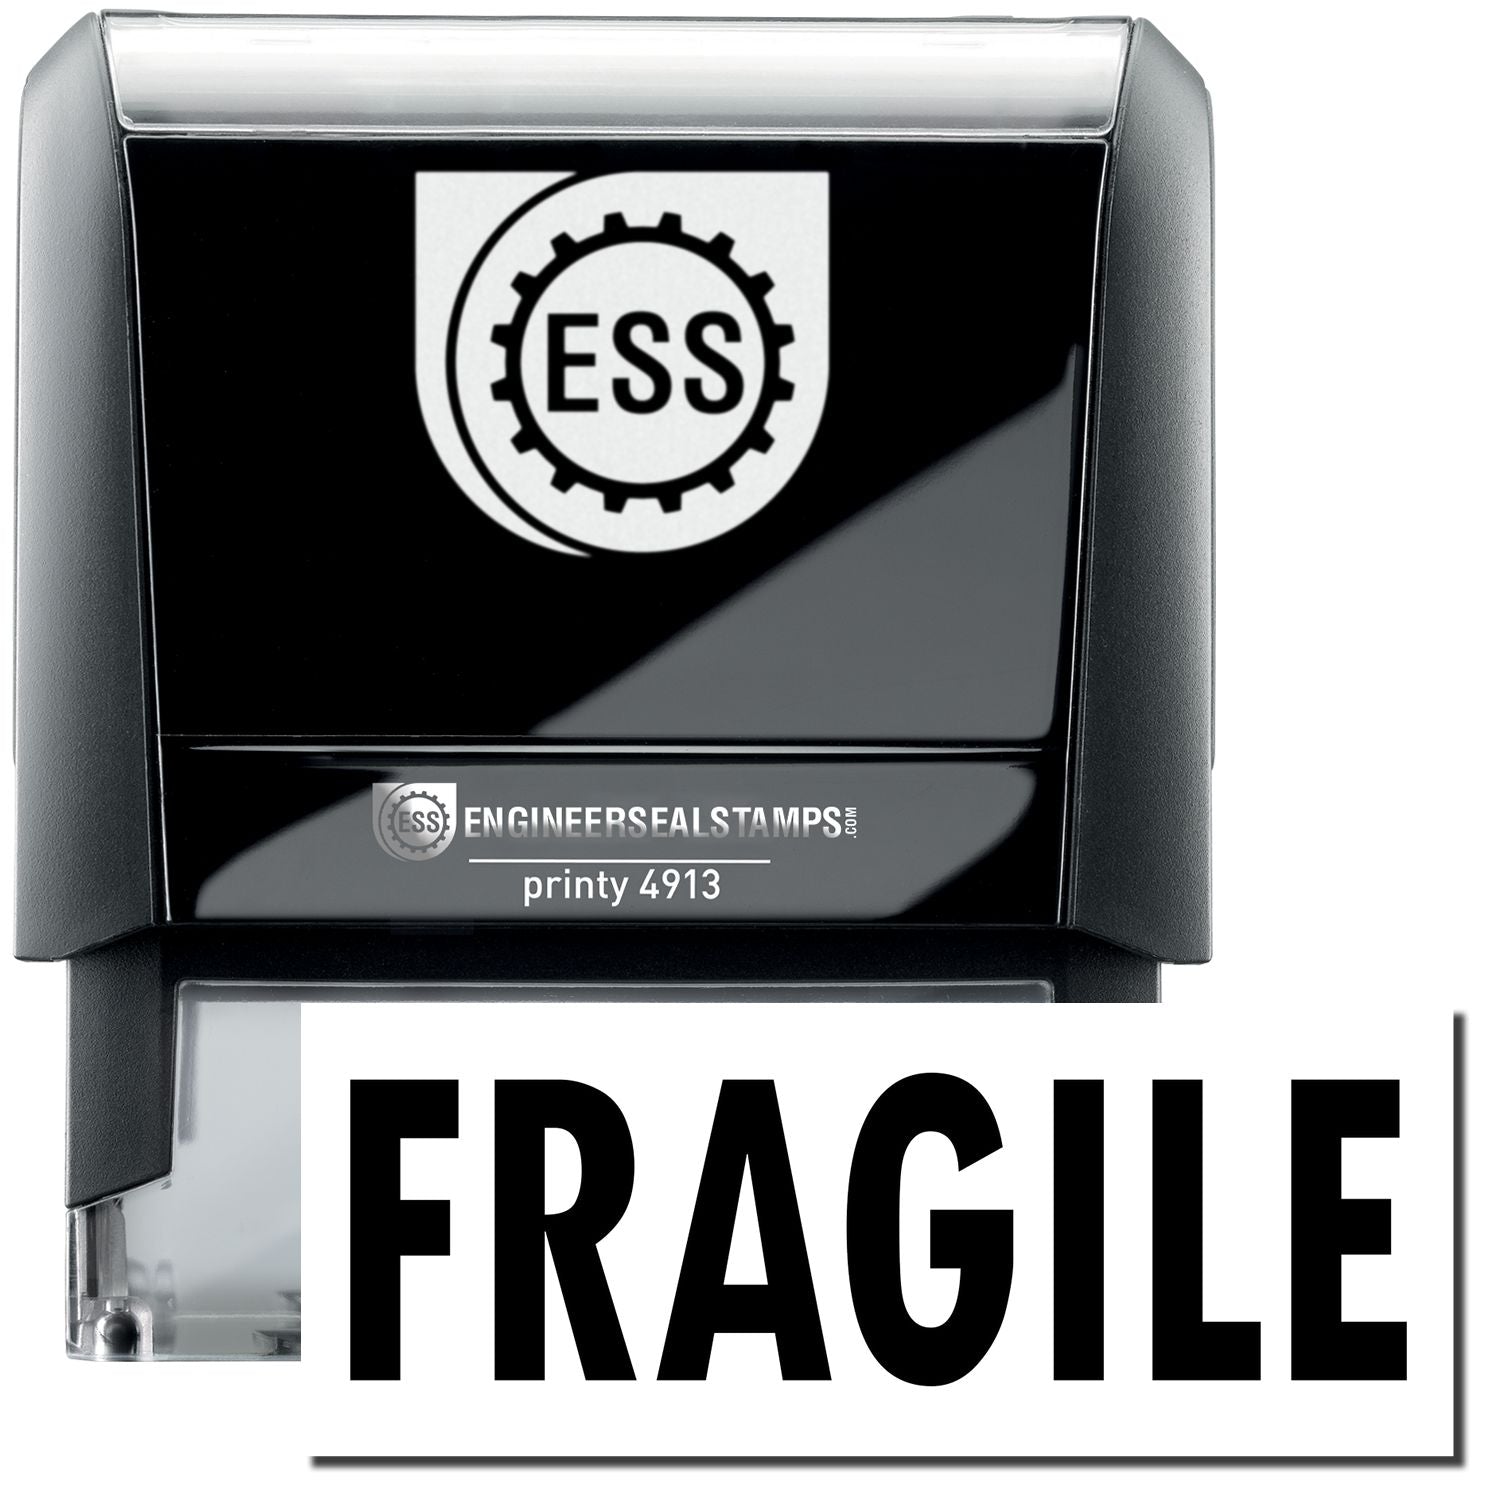 A self-inking stamp with a stamped image showing how the text "FRAGILE" in a large bold font is displayed by it.